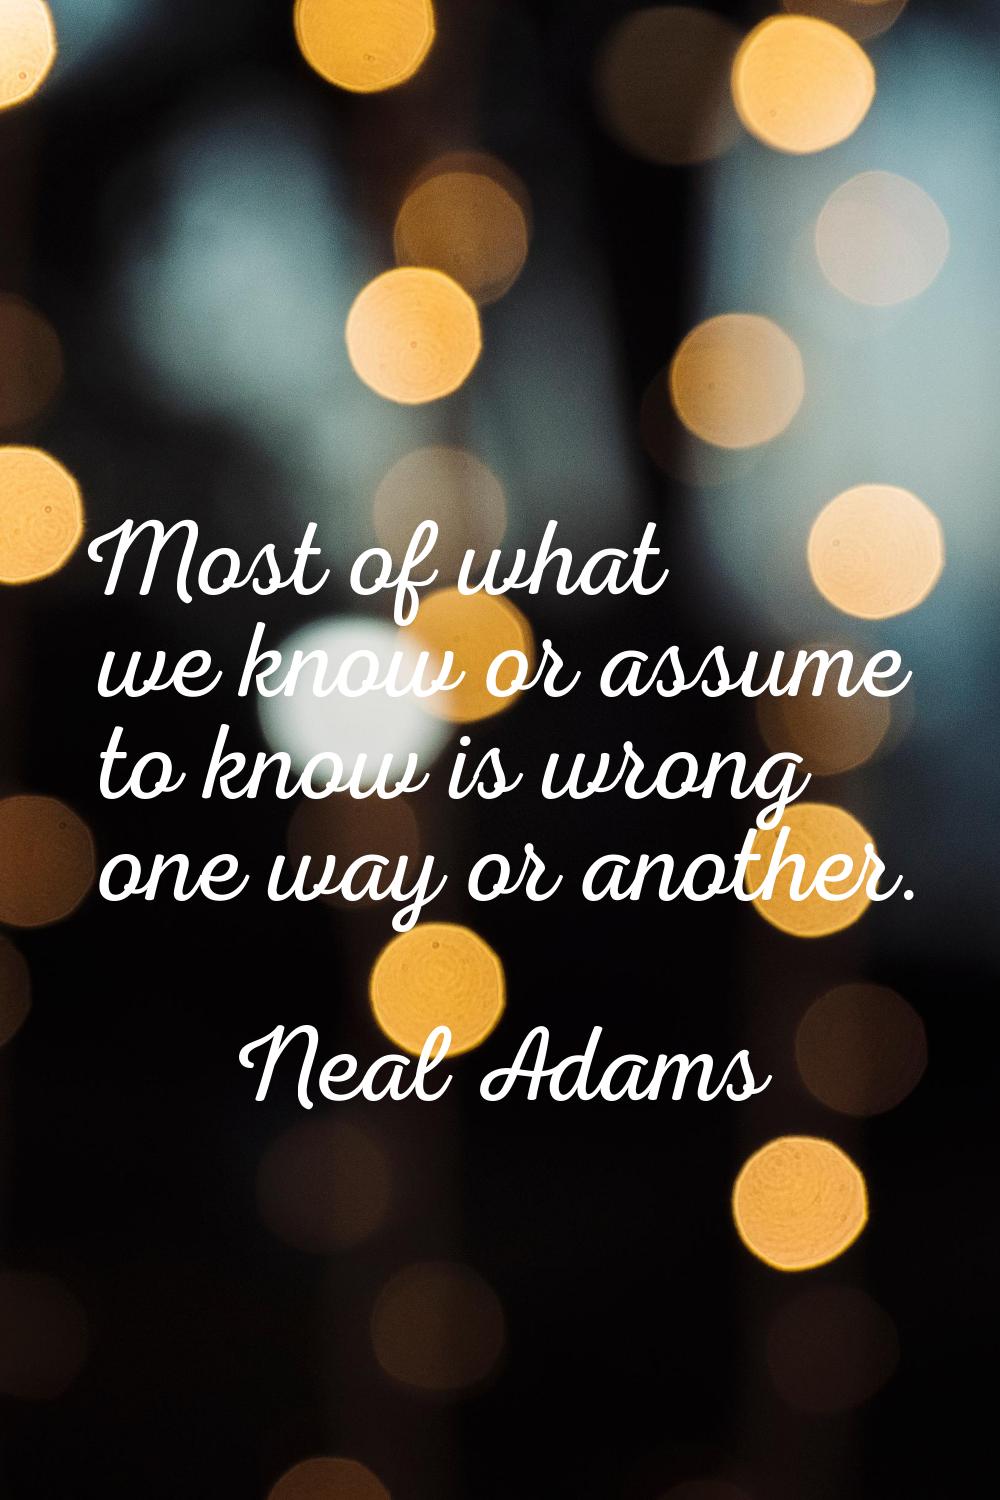 Most of what we know or assume to know is wrong one way or another.